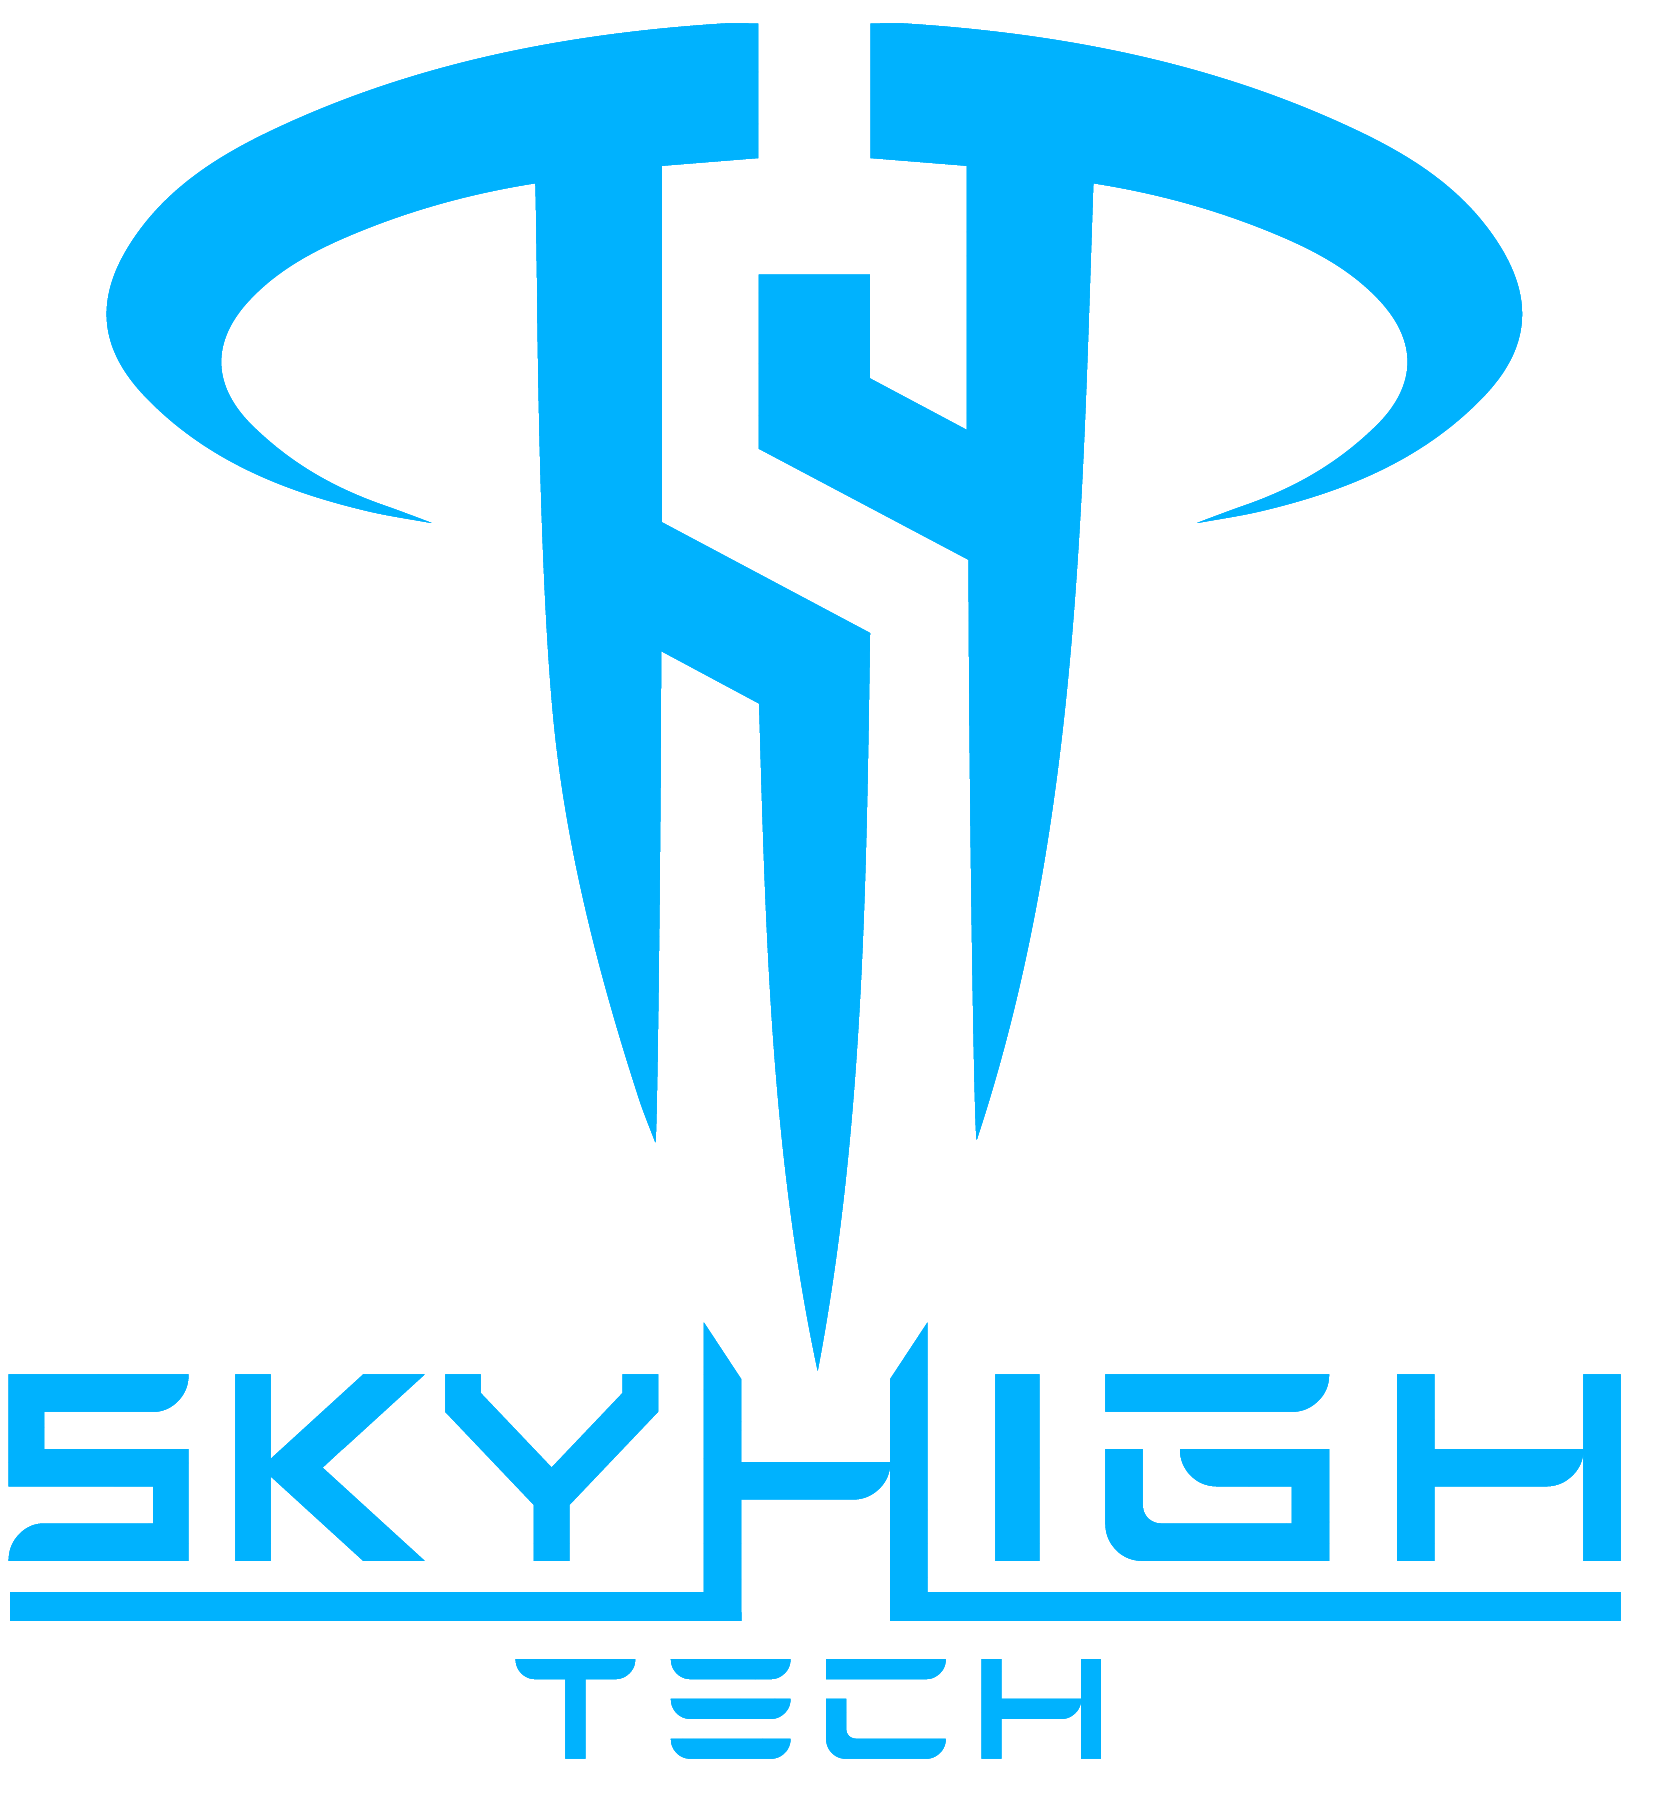 Explore the creativity and innovation of Sky High Tech, your premier design agency in Bahrain, offering top-notch graphic design, web development, and branding solutions for businesses.